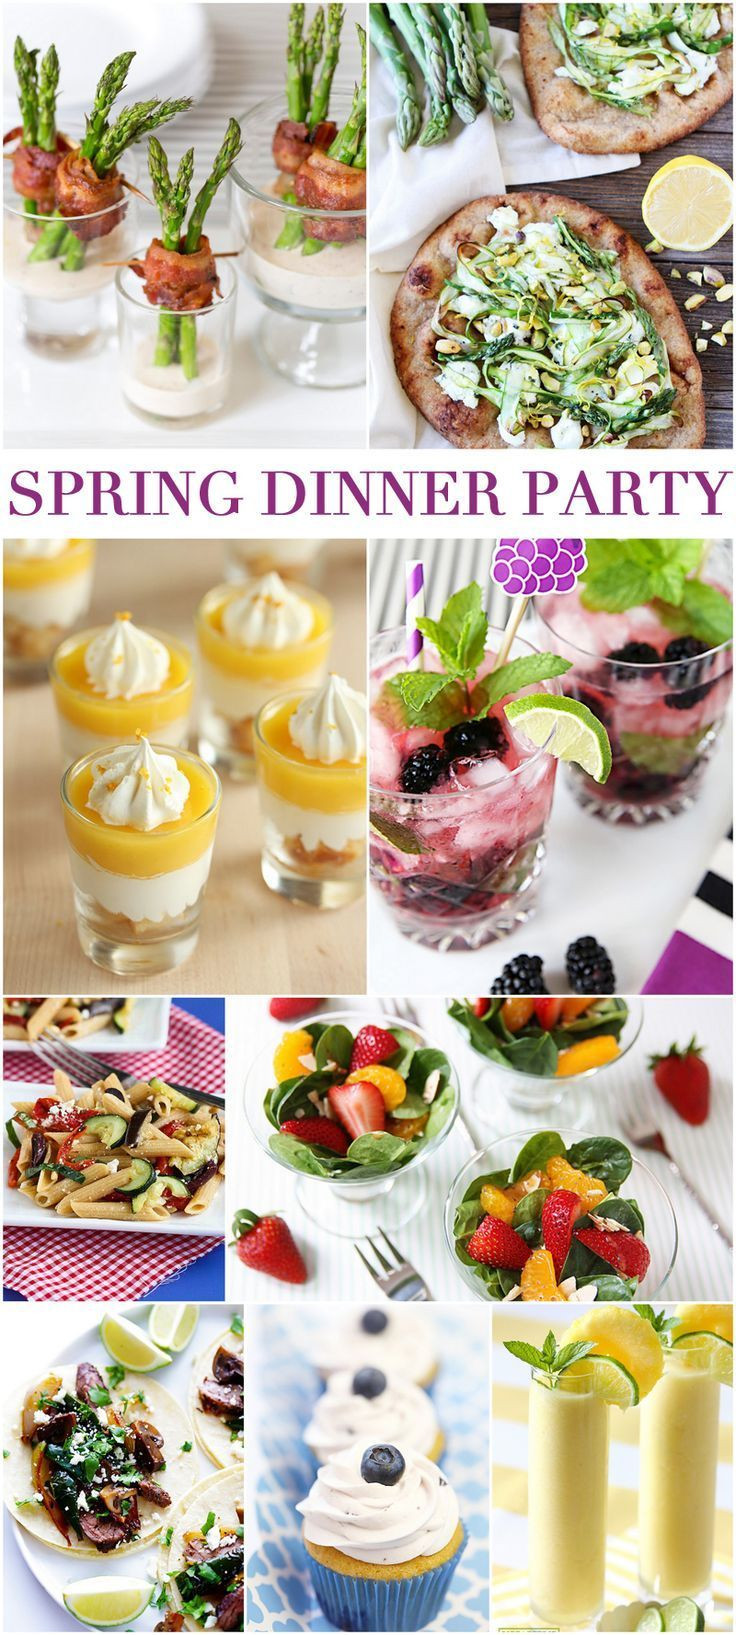 Summer Dinner Party Ideas Pinterest
 Host a Spring Dinner Party in Style